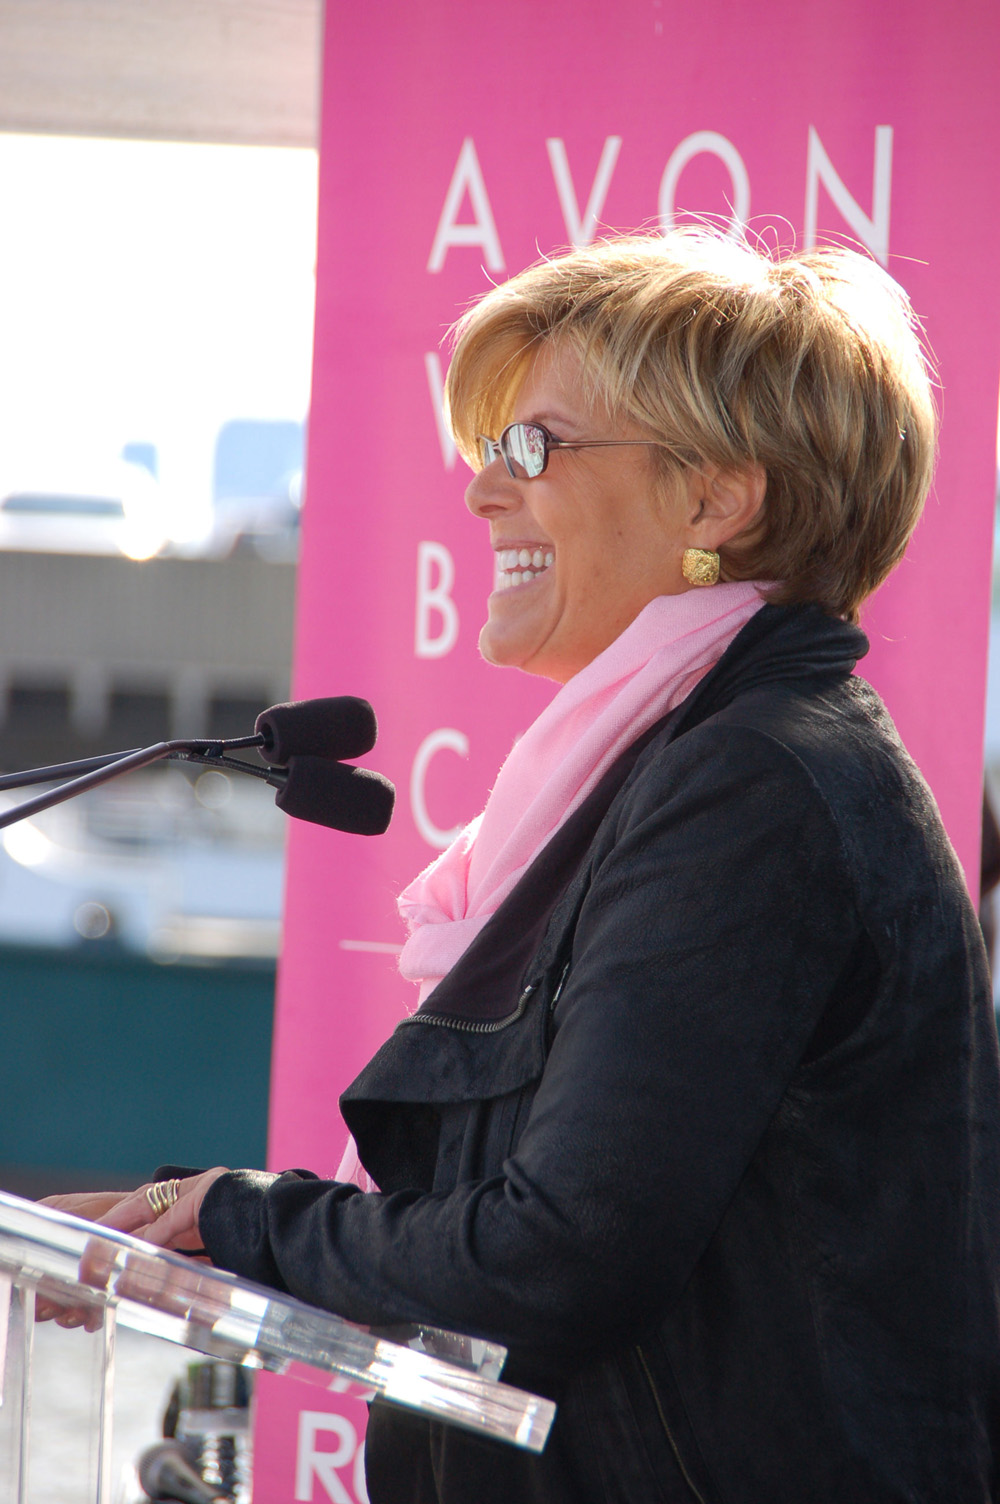 Avon Walk for Breast Cancer Draw Thousands and Raise $14 million